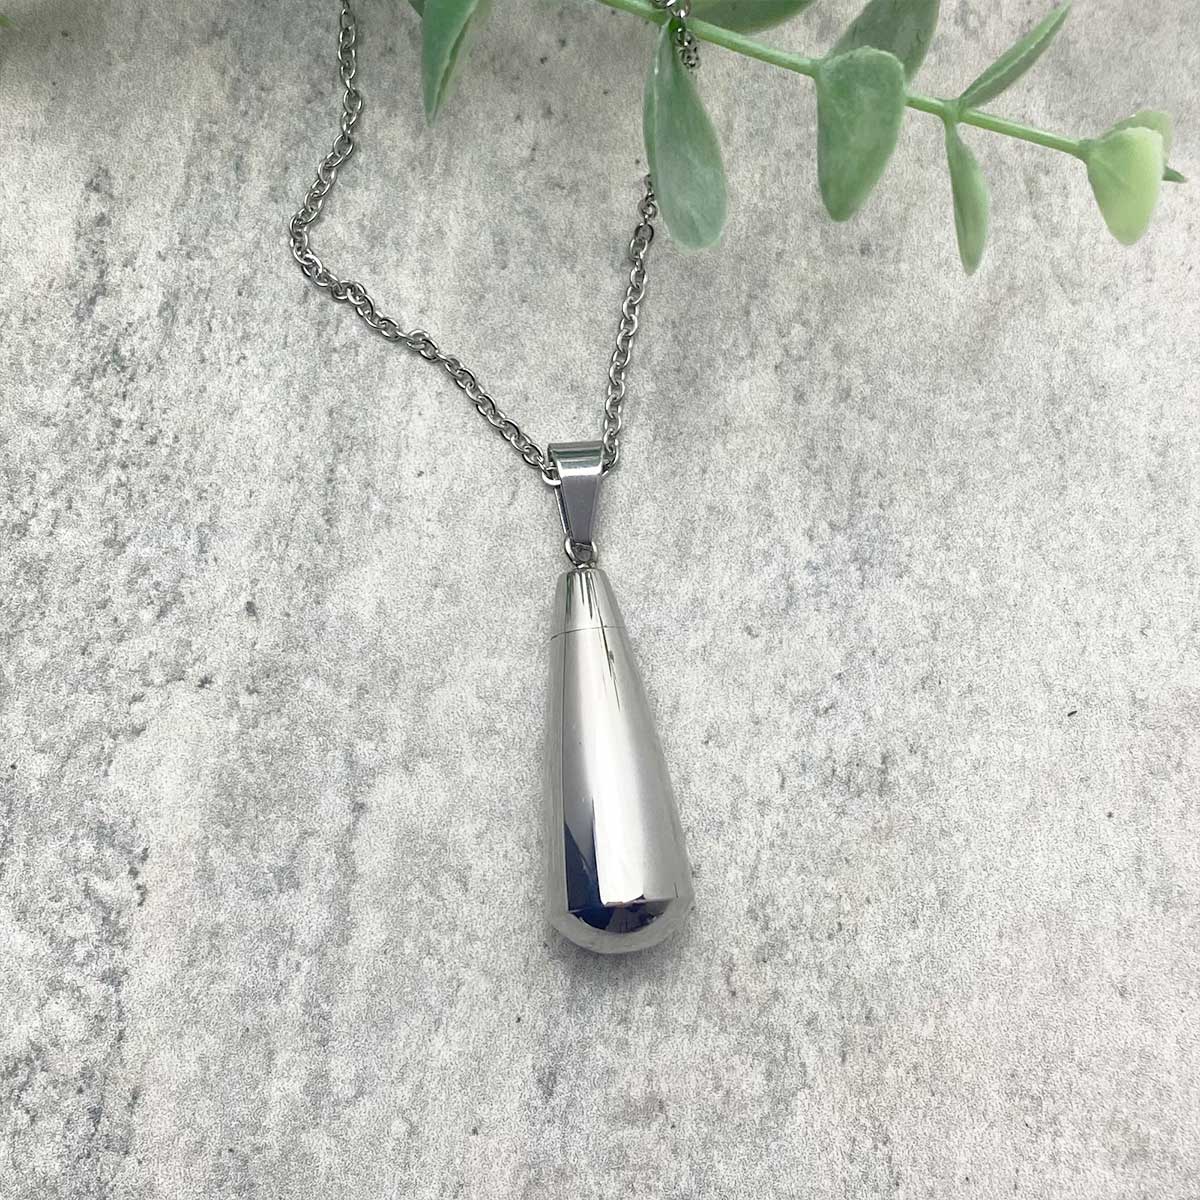 Teardrop Cremation Ashes Memorial Urn Necklace